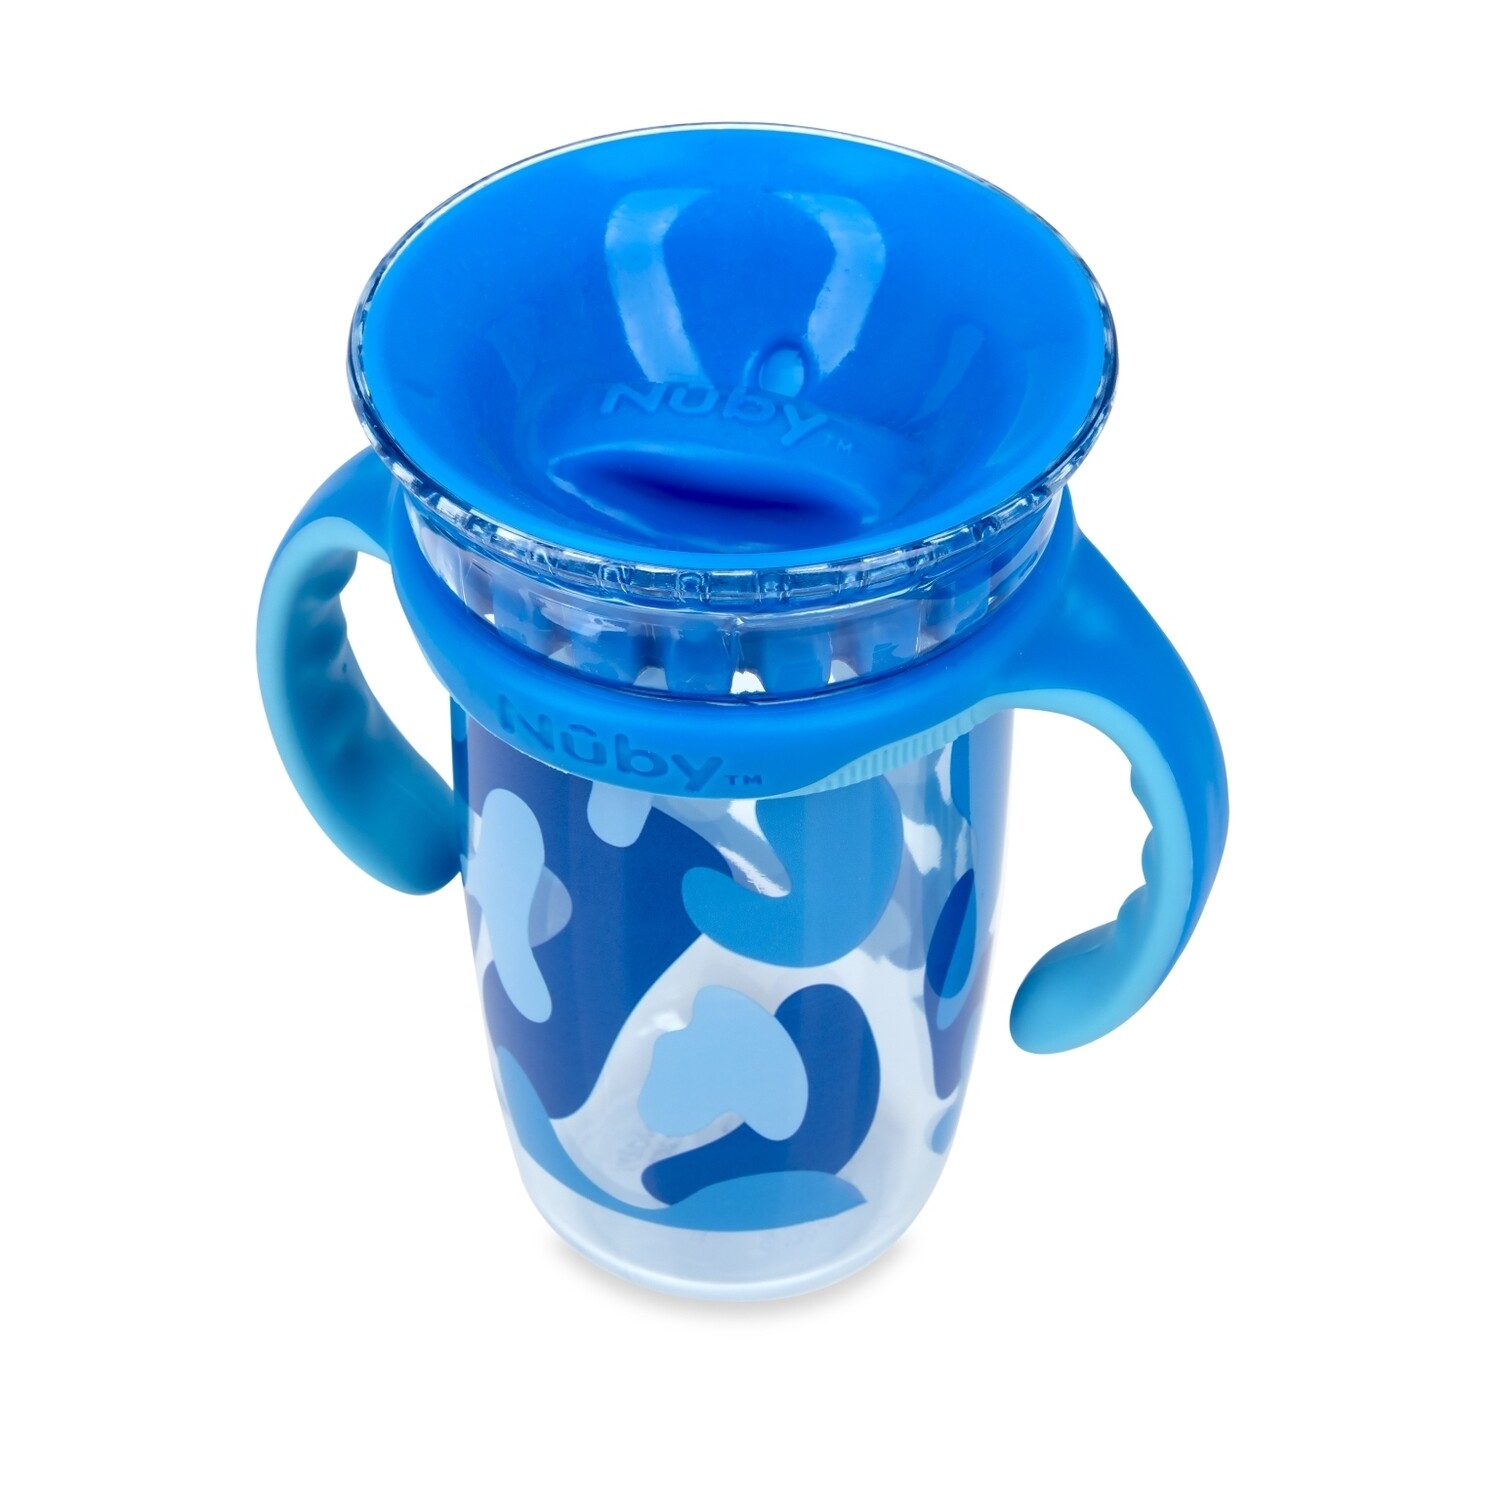 . Case of [48] Nuby 2 Stage Drinking Cups - 360 Edge Rim, Blue .